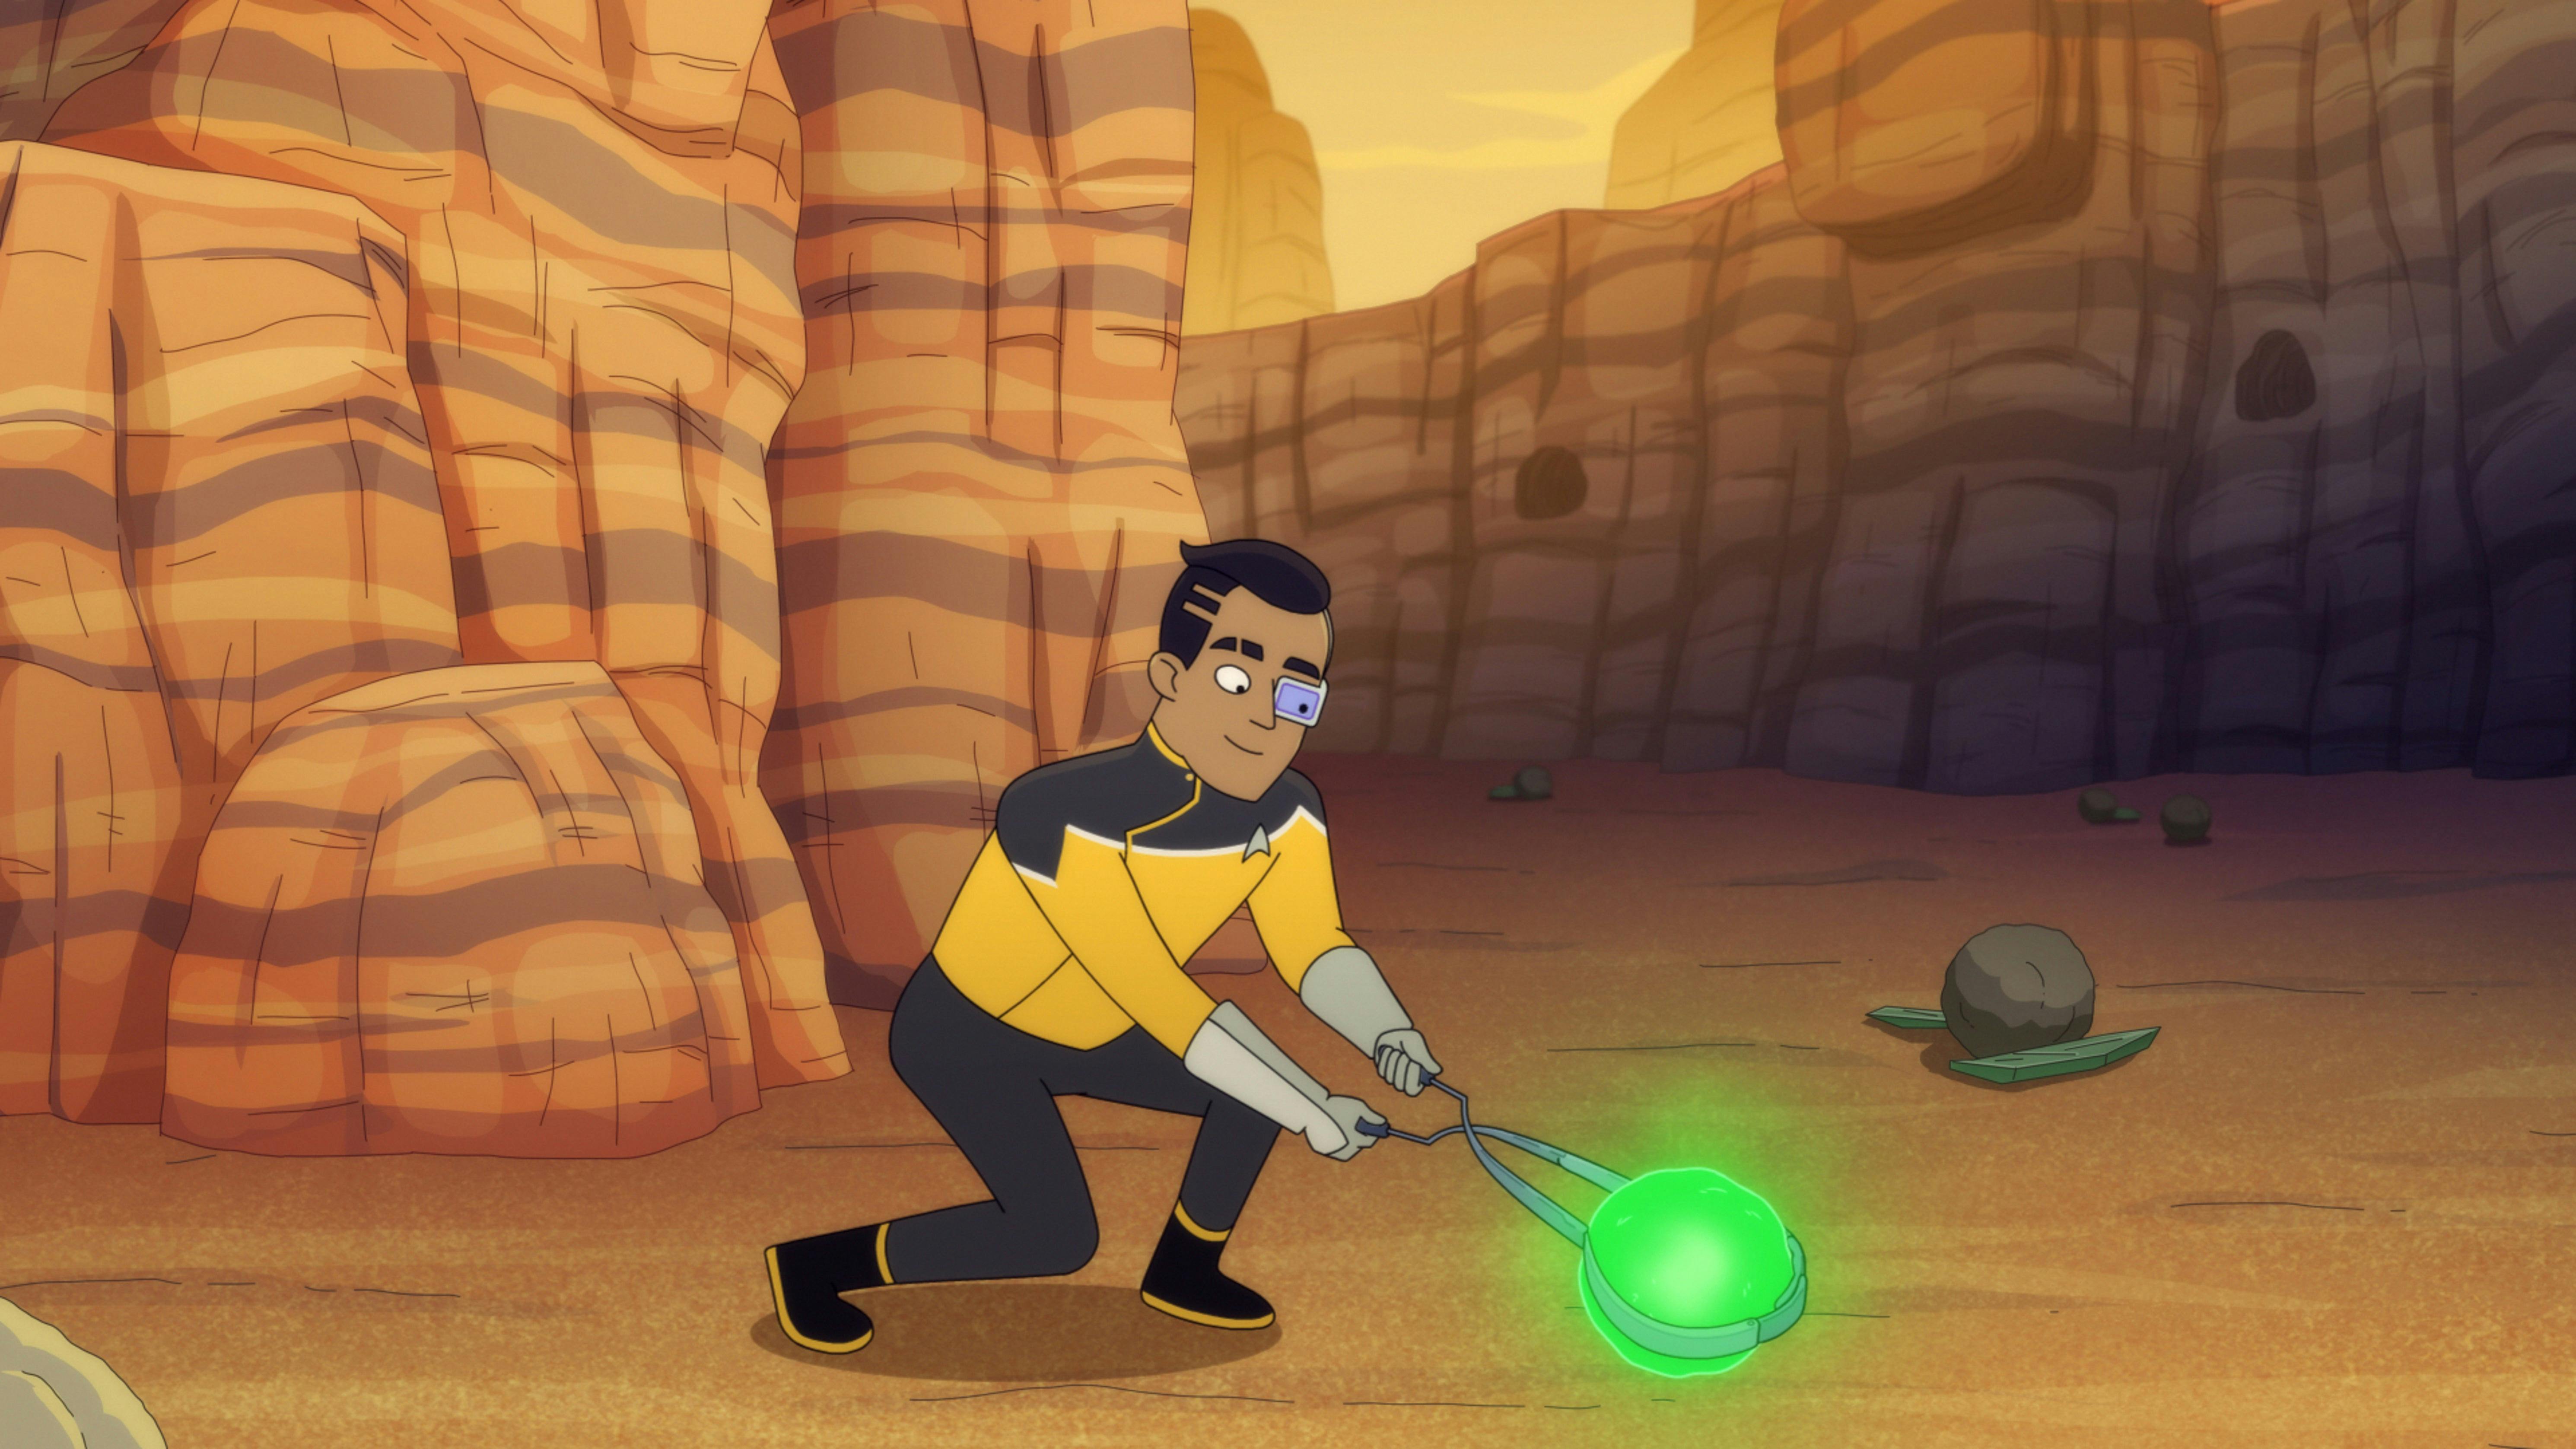 Rutherford, wearing gloves, uses tongs to pick up a glowing green orb.